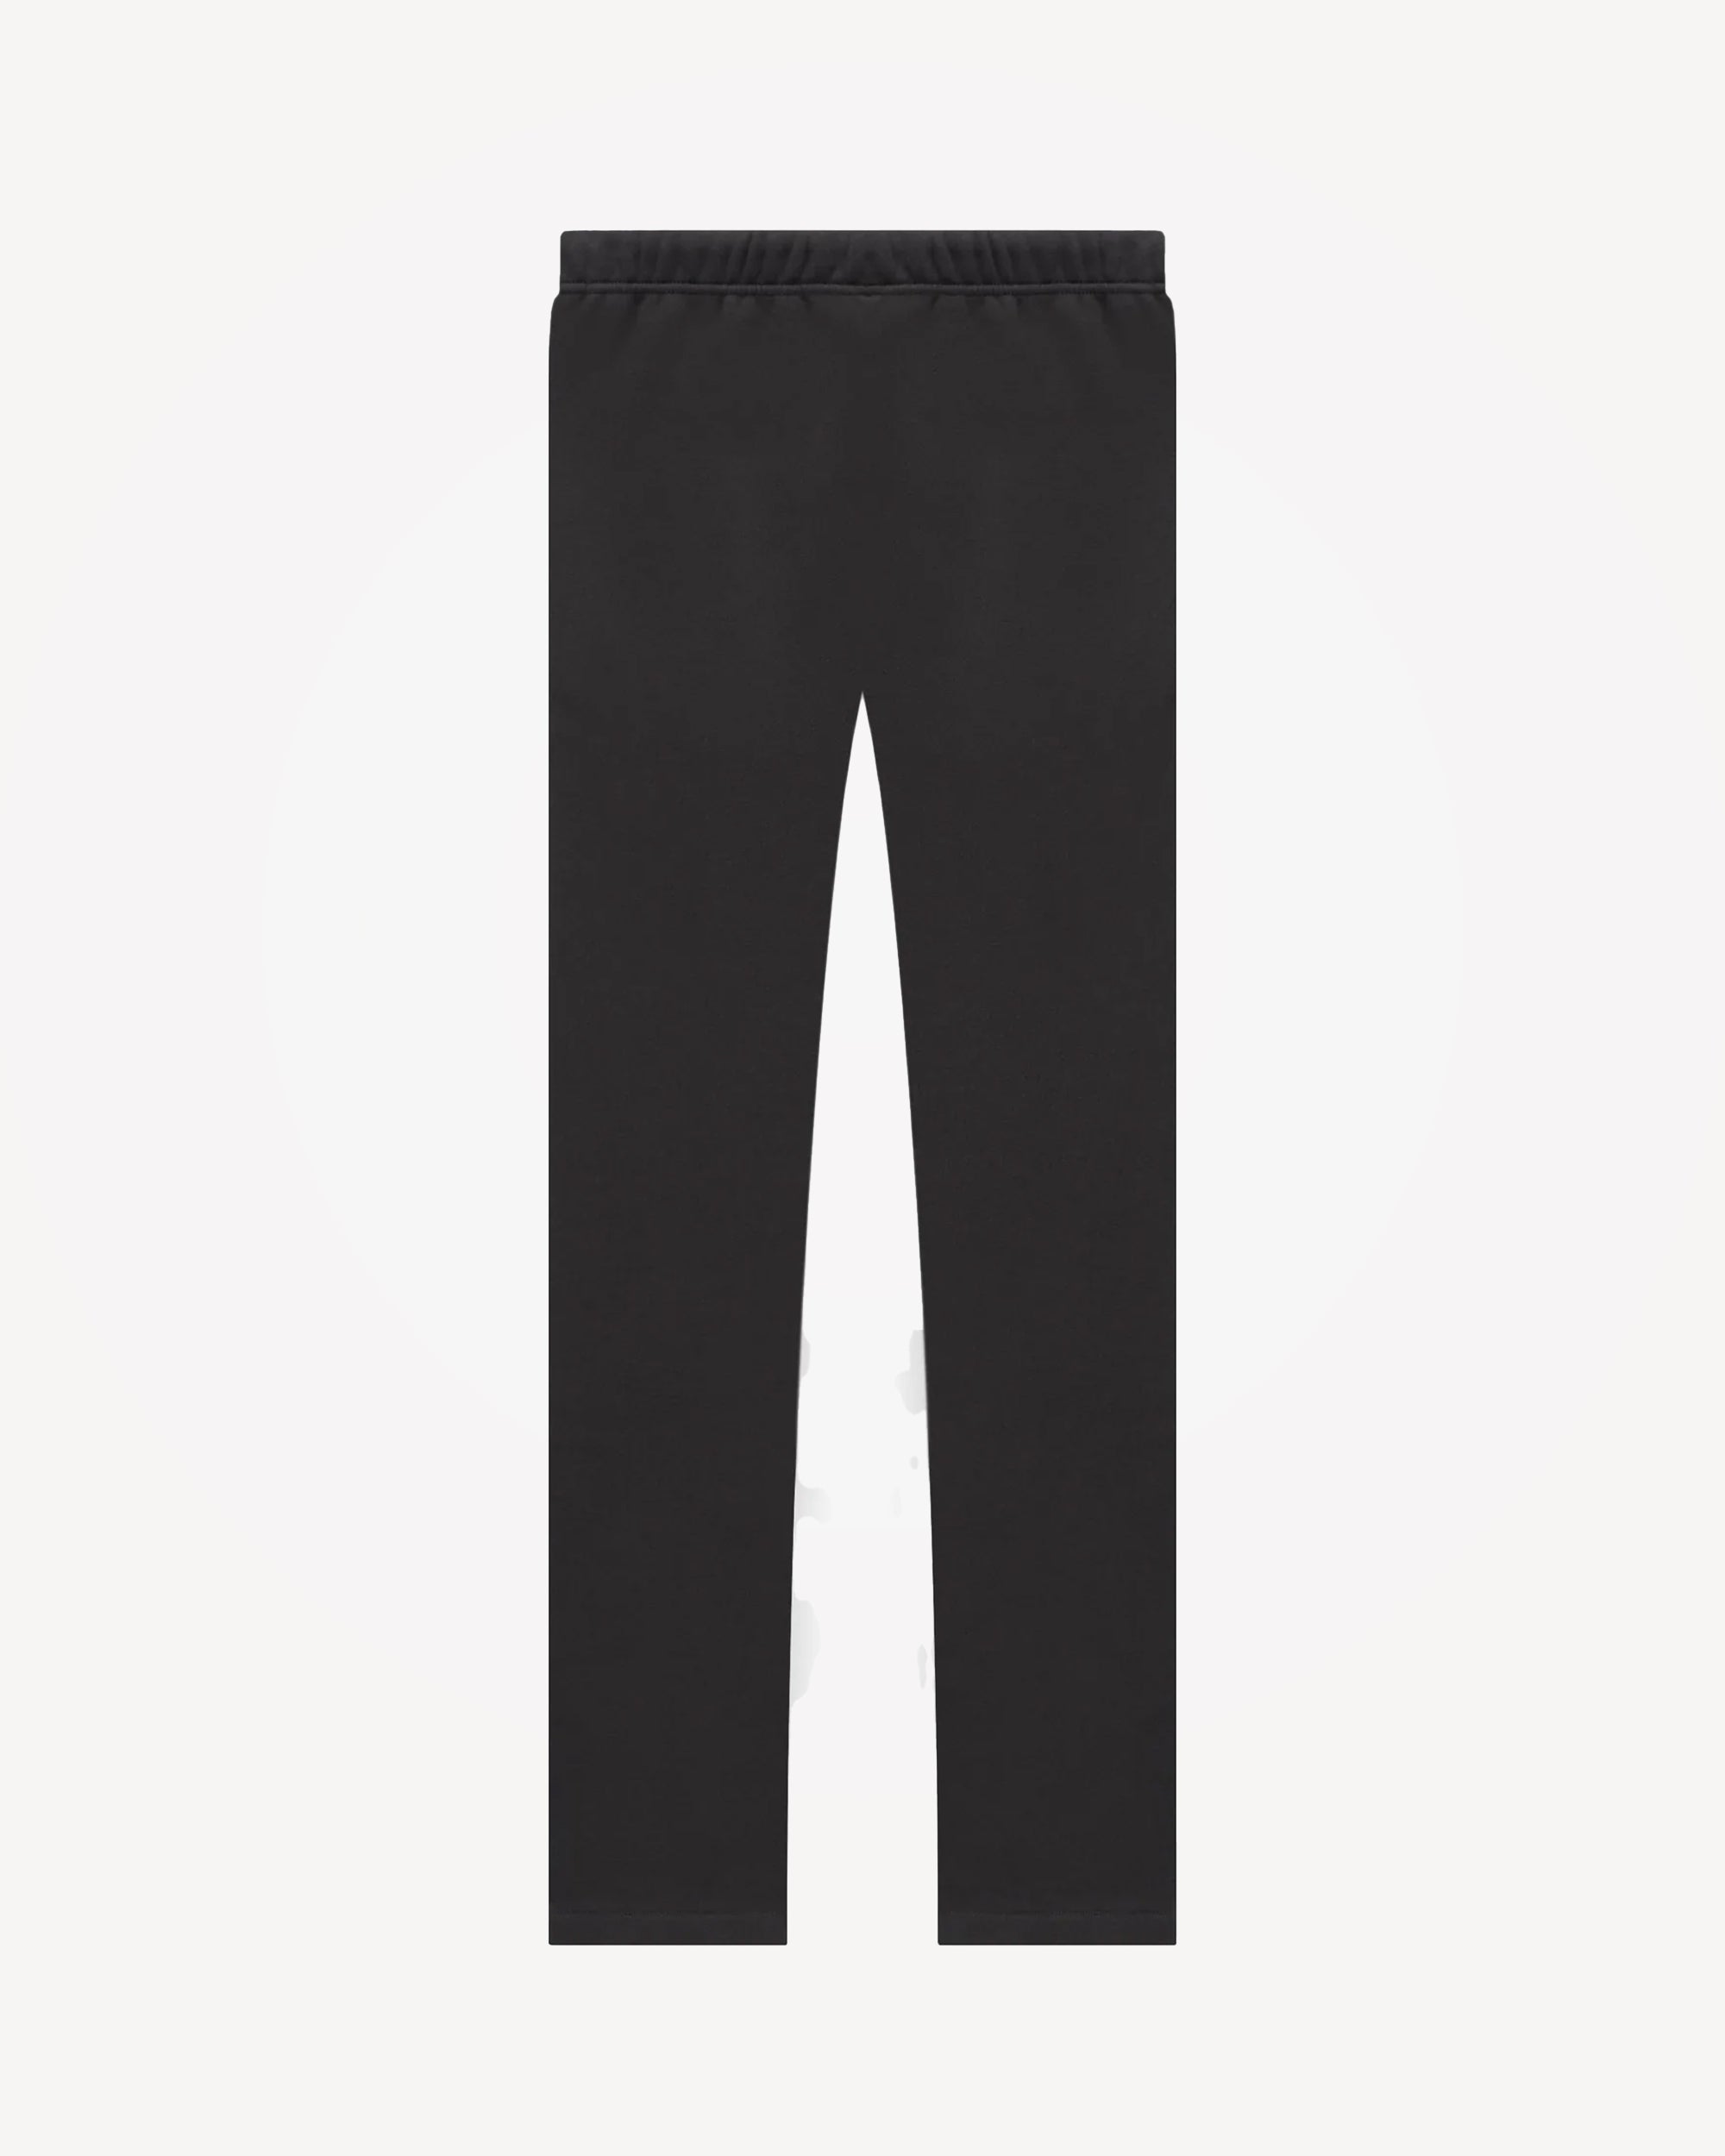 Men's '1977' Relaxed Sweatpants in Iron